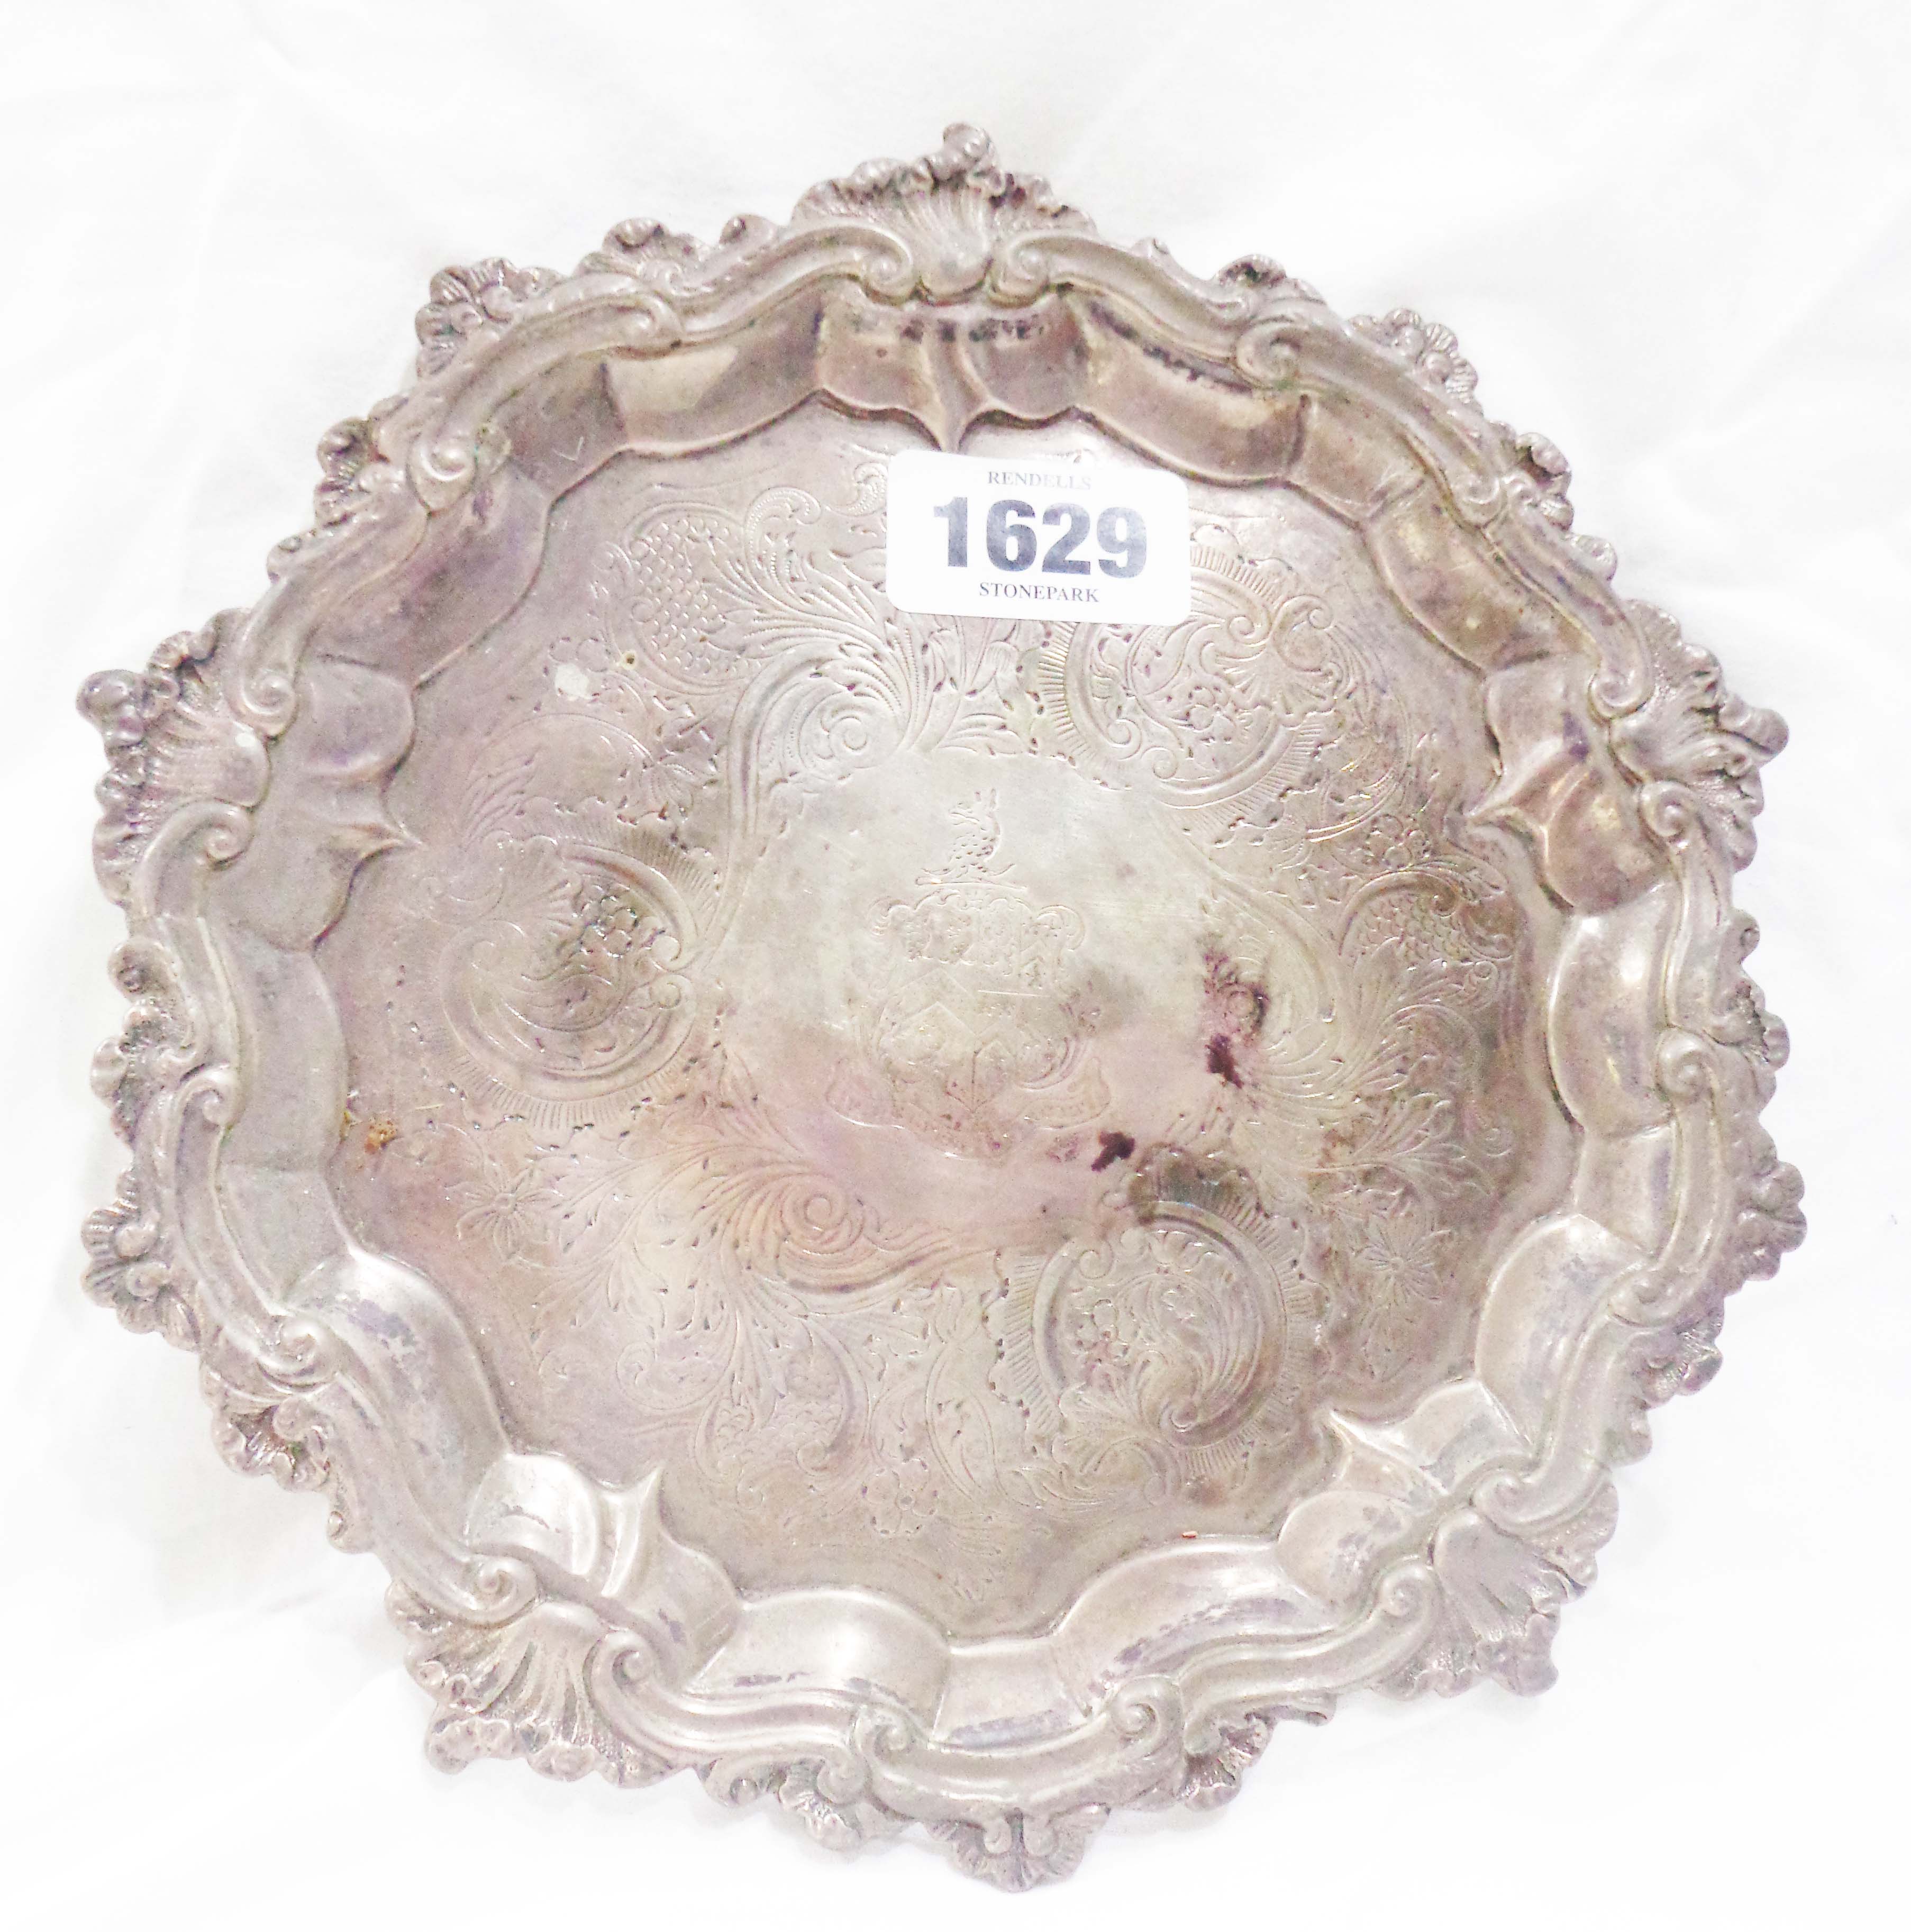 A 21cm diameter silver salver with central armourial and engraved decoration, Rococo cast rim and